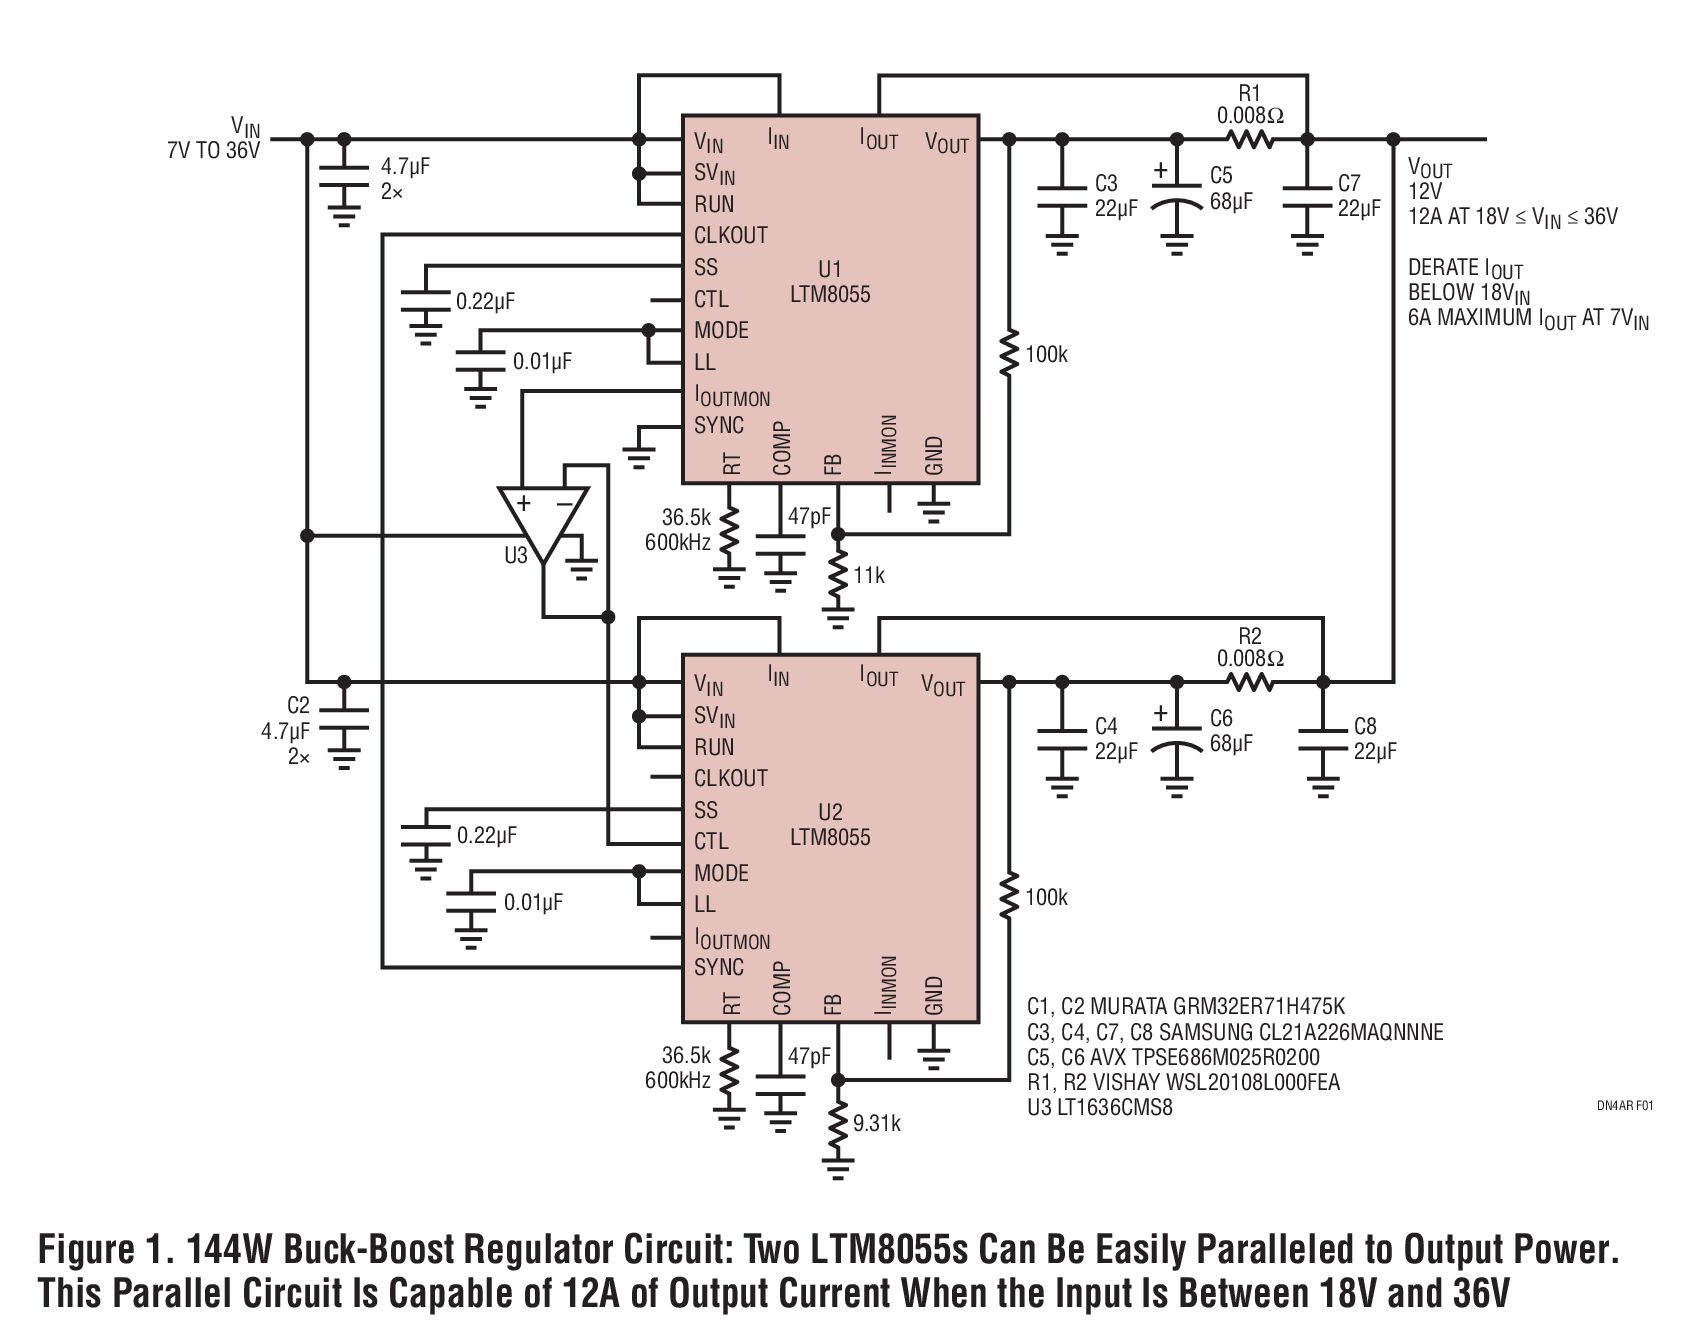 Figure 1. 144W Buck-Boost Regulator Circuit: Two LTM8055s Can Be Easily Paralleled to Output Power. This Parallel Circuit Is Capable of 12A of Output Current When the Input Is Between 18V and 36V